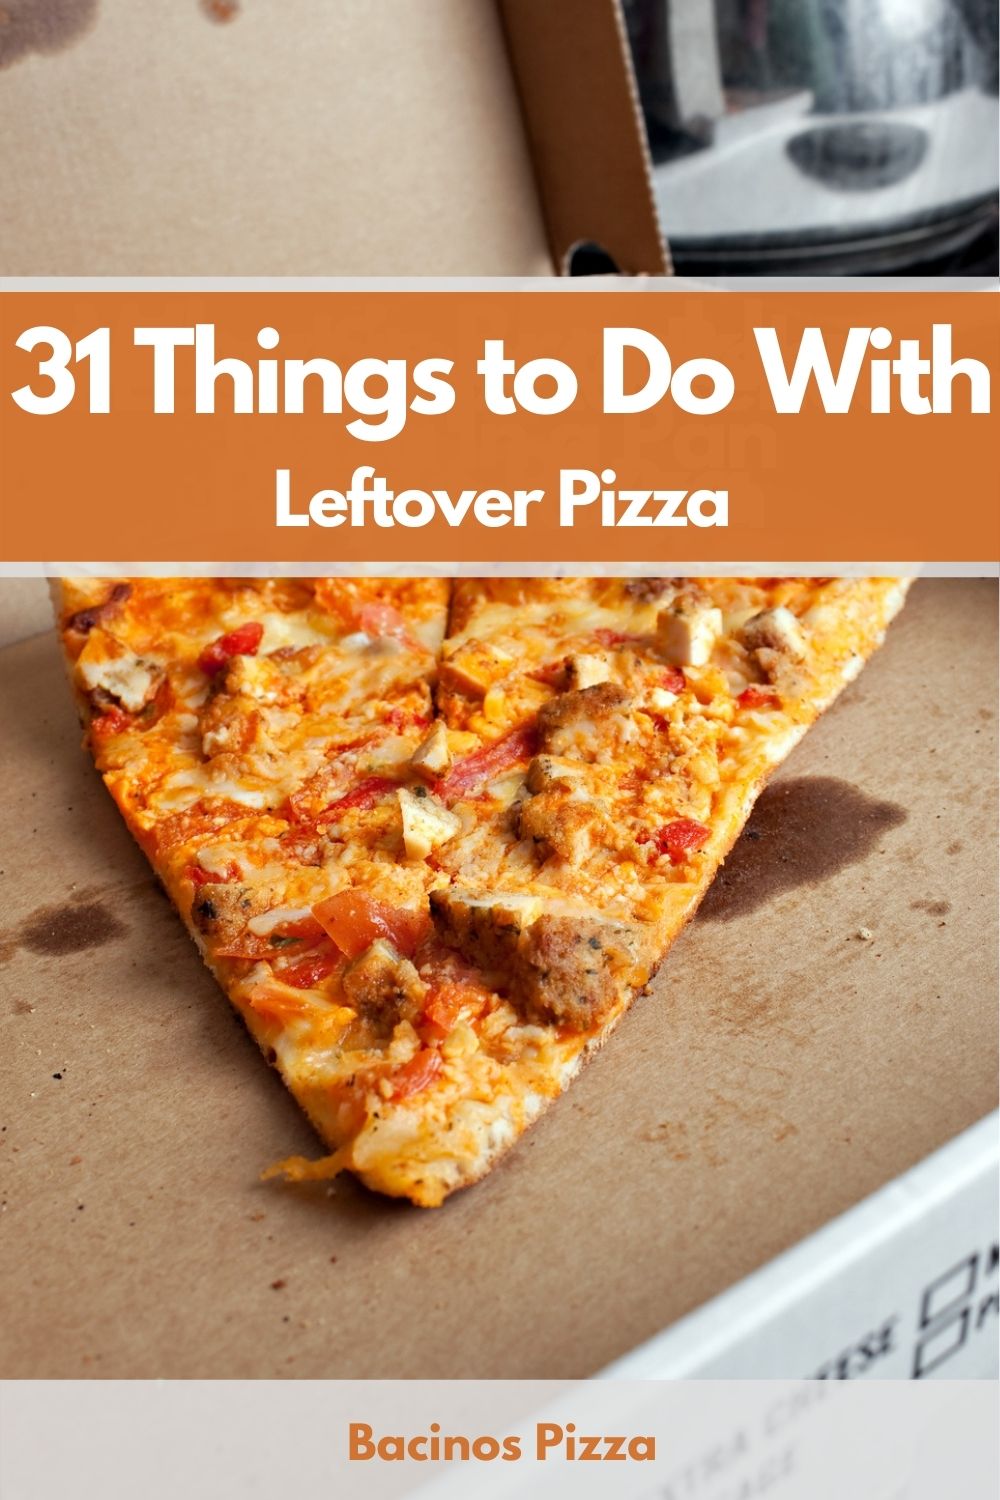 31 Things to Do With Leftover Pizza pin